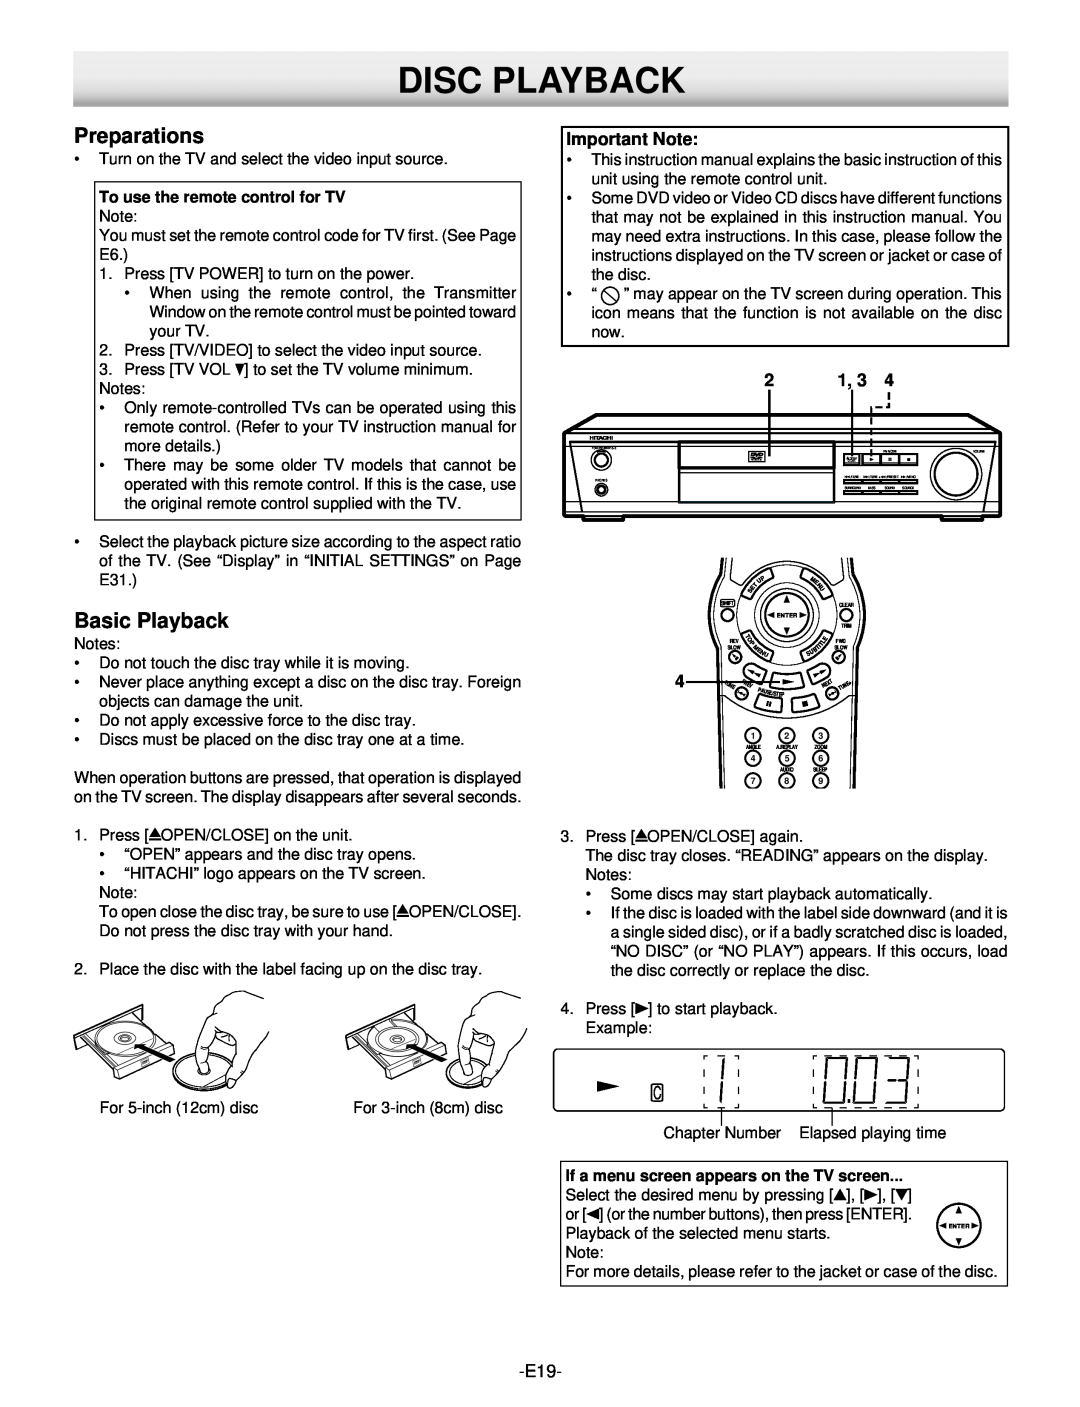 Hitachi DV-S522U instruction manual Disc Playback, Preparations, Basic Playback, To use the remote control for TV Note 